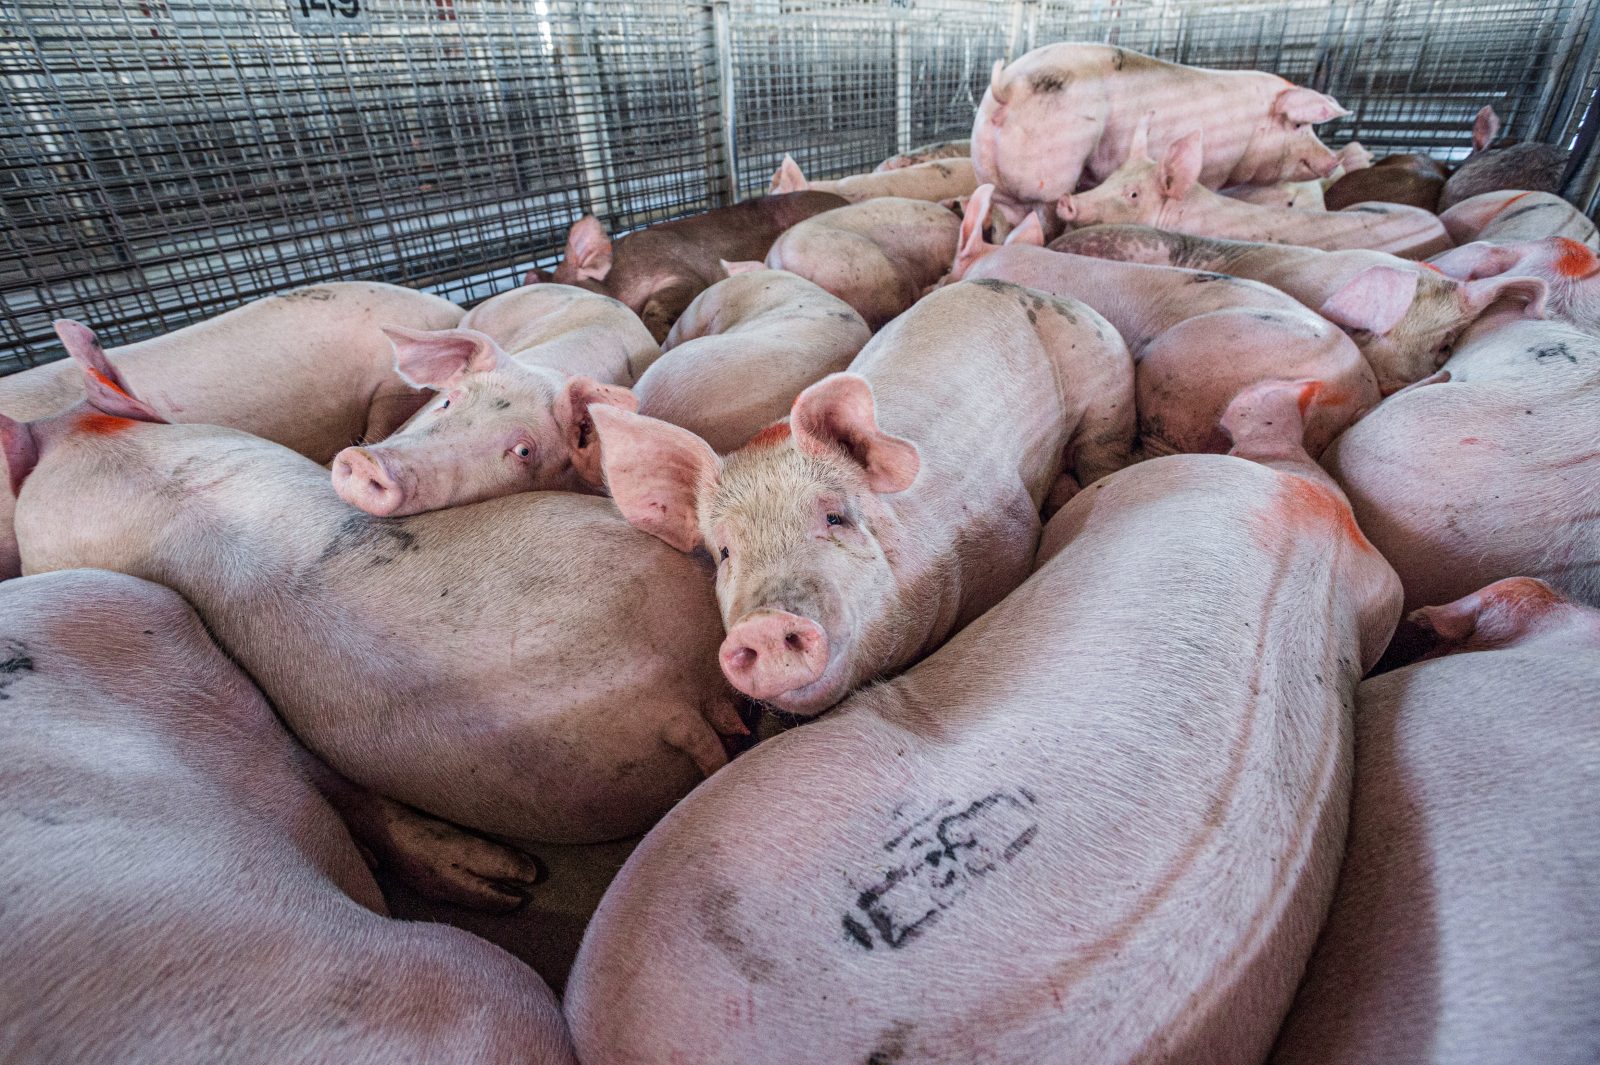 Pigs crammed in to pens at the sale yards. Australia, 2017. / Jo-Anne McArthur / We Animals